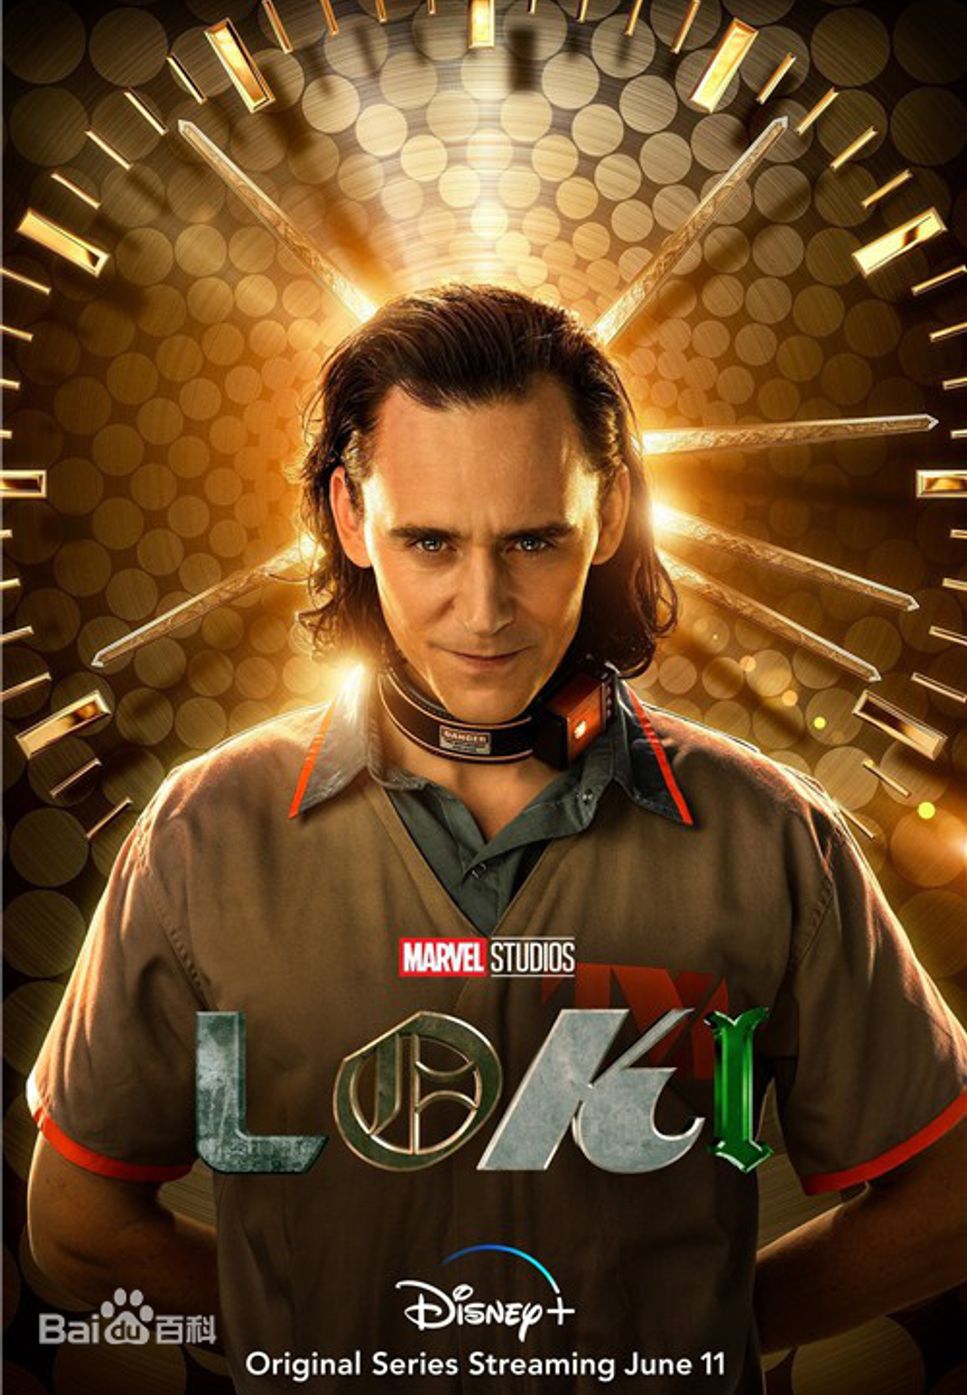 Natalie Holt - Loki Green Theme (Natalie Holt - "Loki" OST - For Piano Solo) by poon